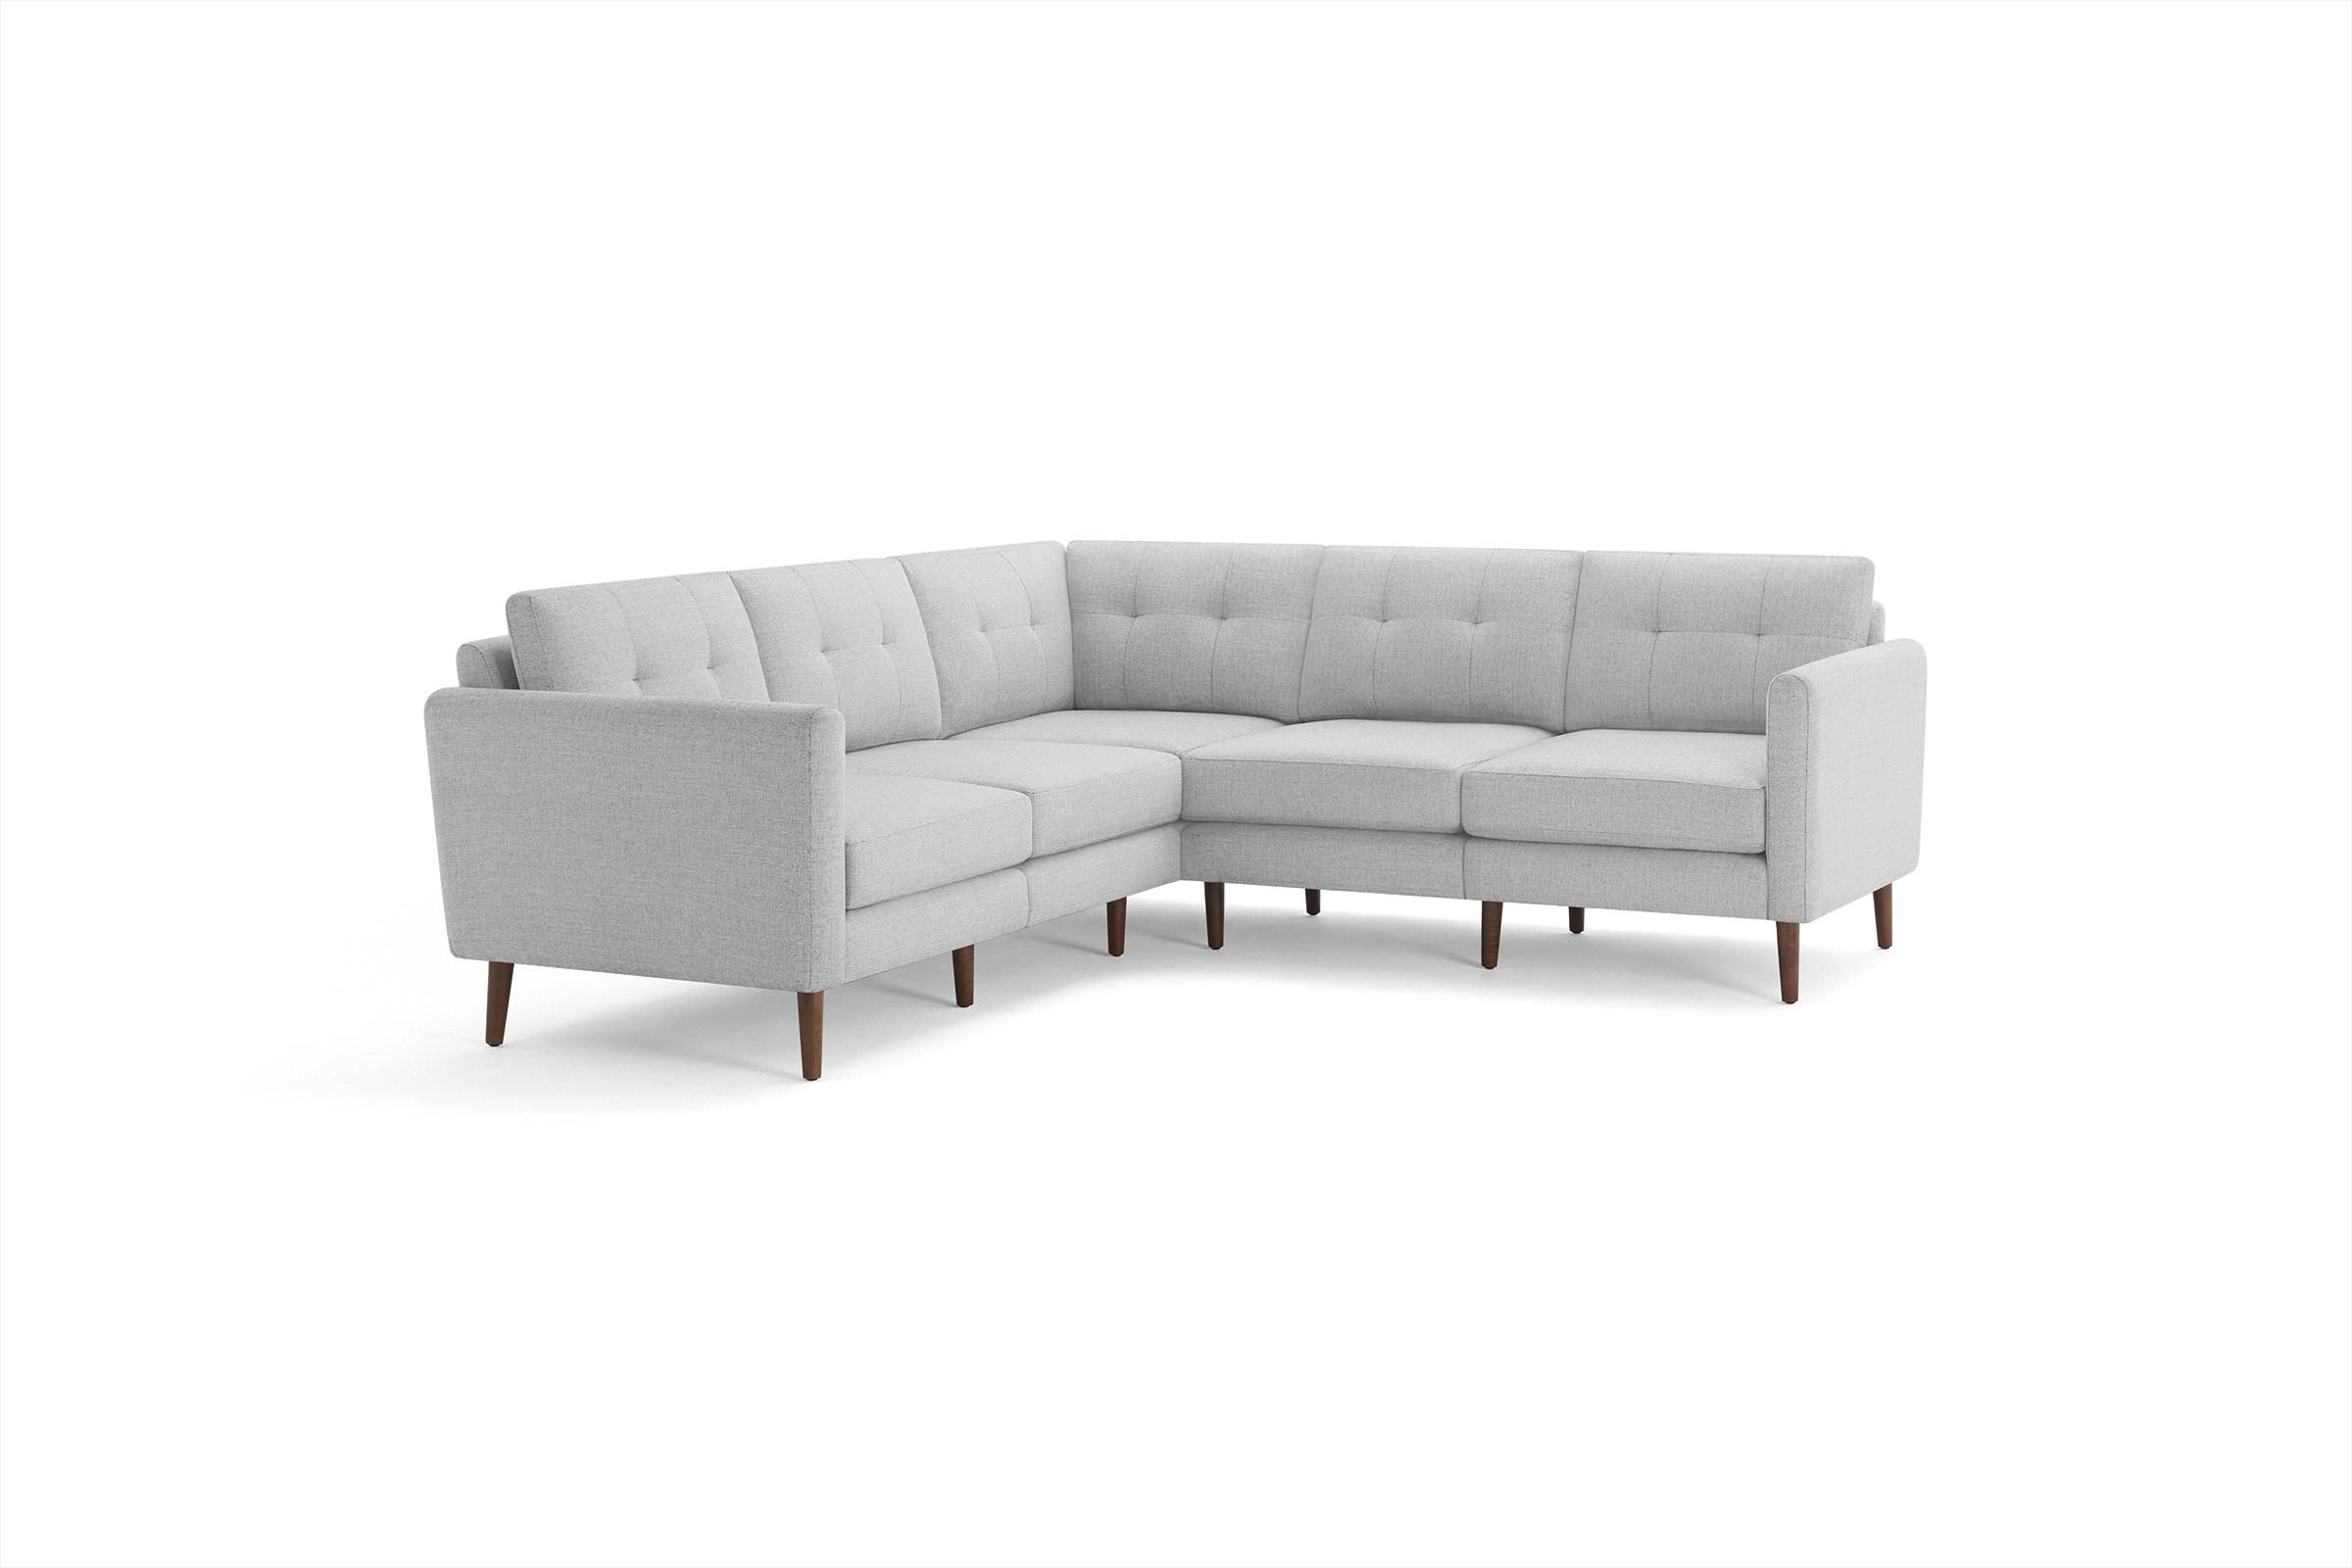 The Arch Nomad 5-Seat Corner Sectional in Crushed Gravel, Walnut Legs